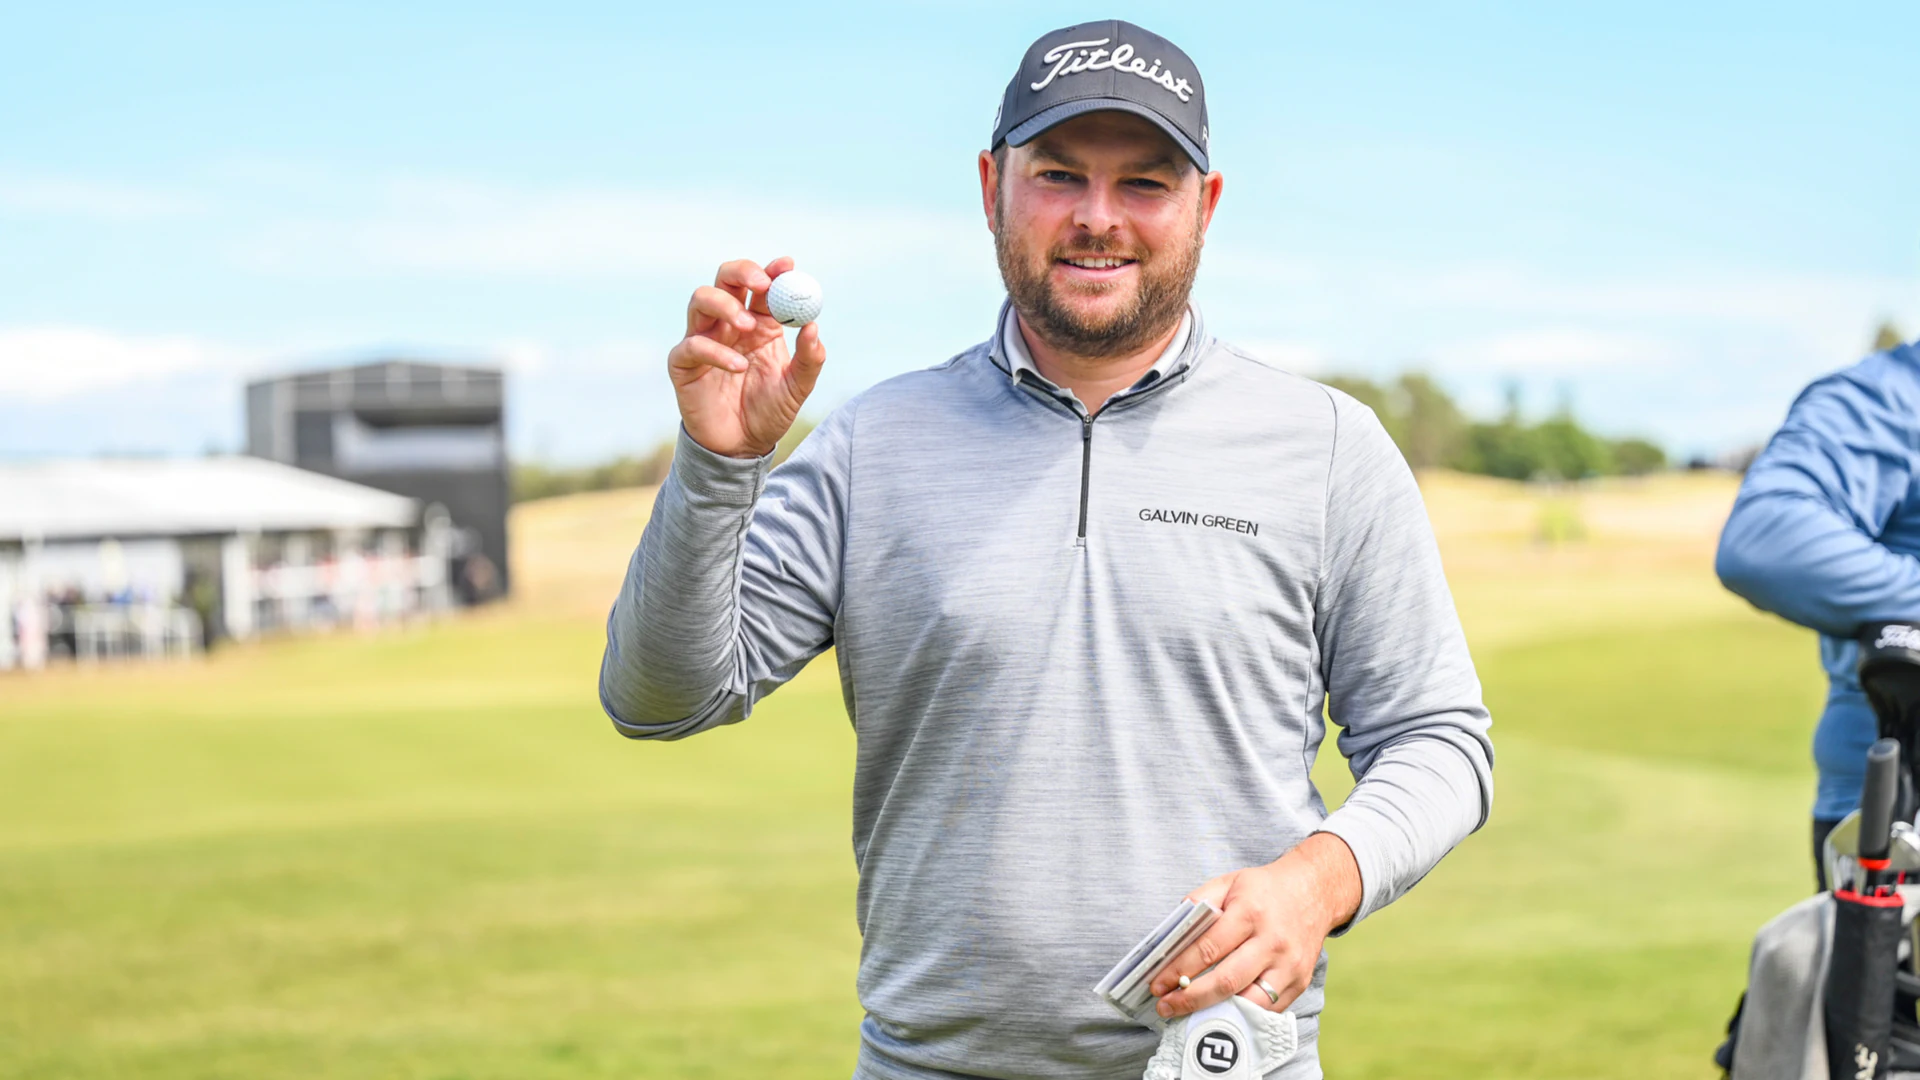 One ace worth two cars: Jordan Smith’s hole-in-one at 2022 Genesis Scottish Open wins big